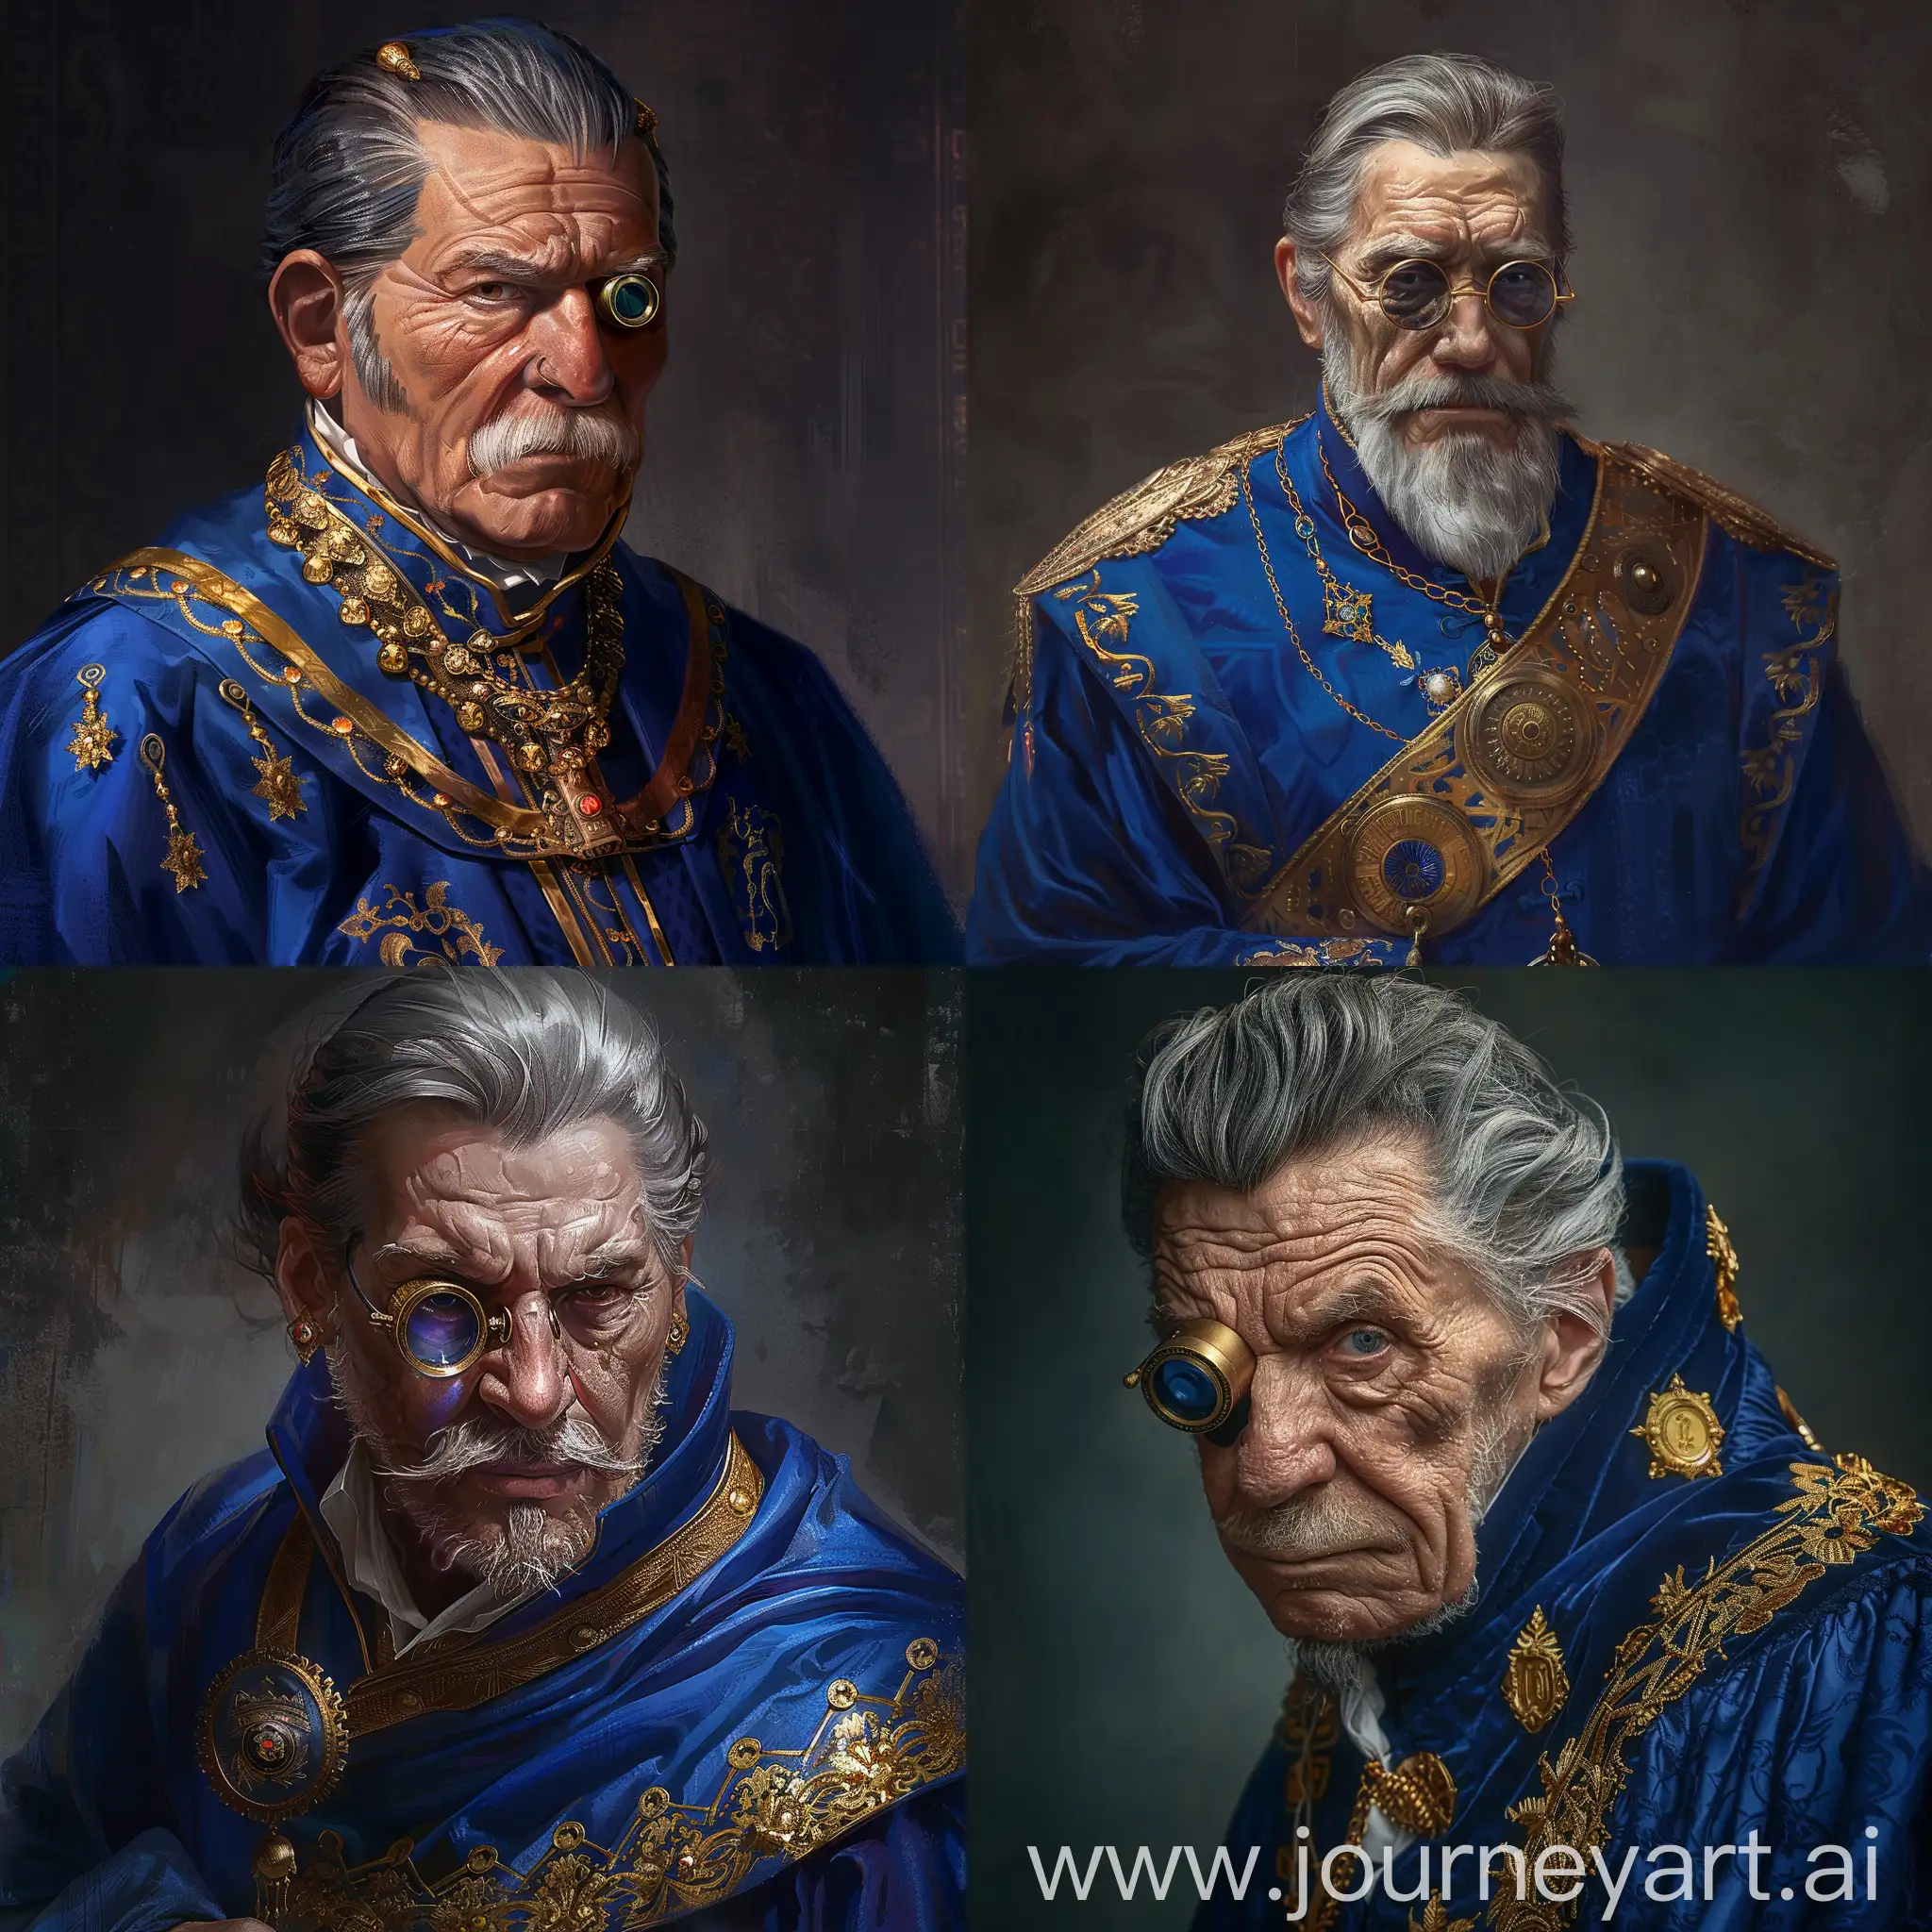 Elderly-Northern-Nobleman-in-Elegant-Blue-Robes-with-Gold-Ornaments